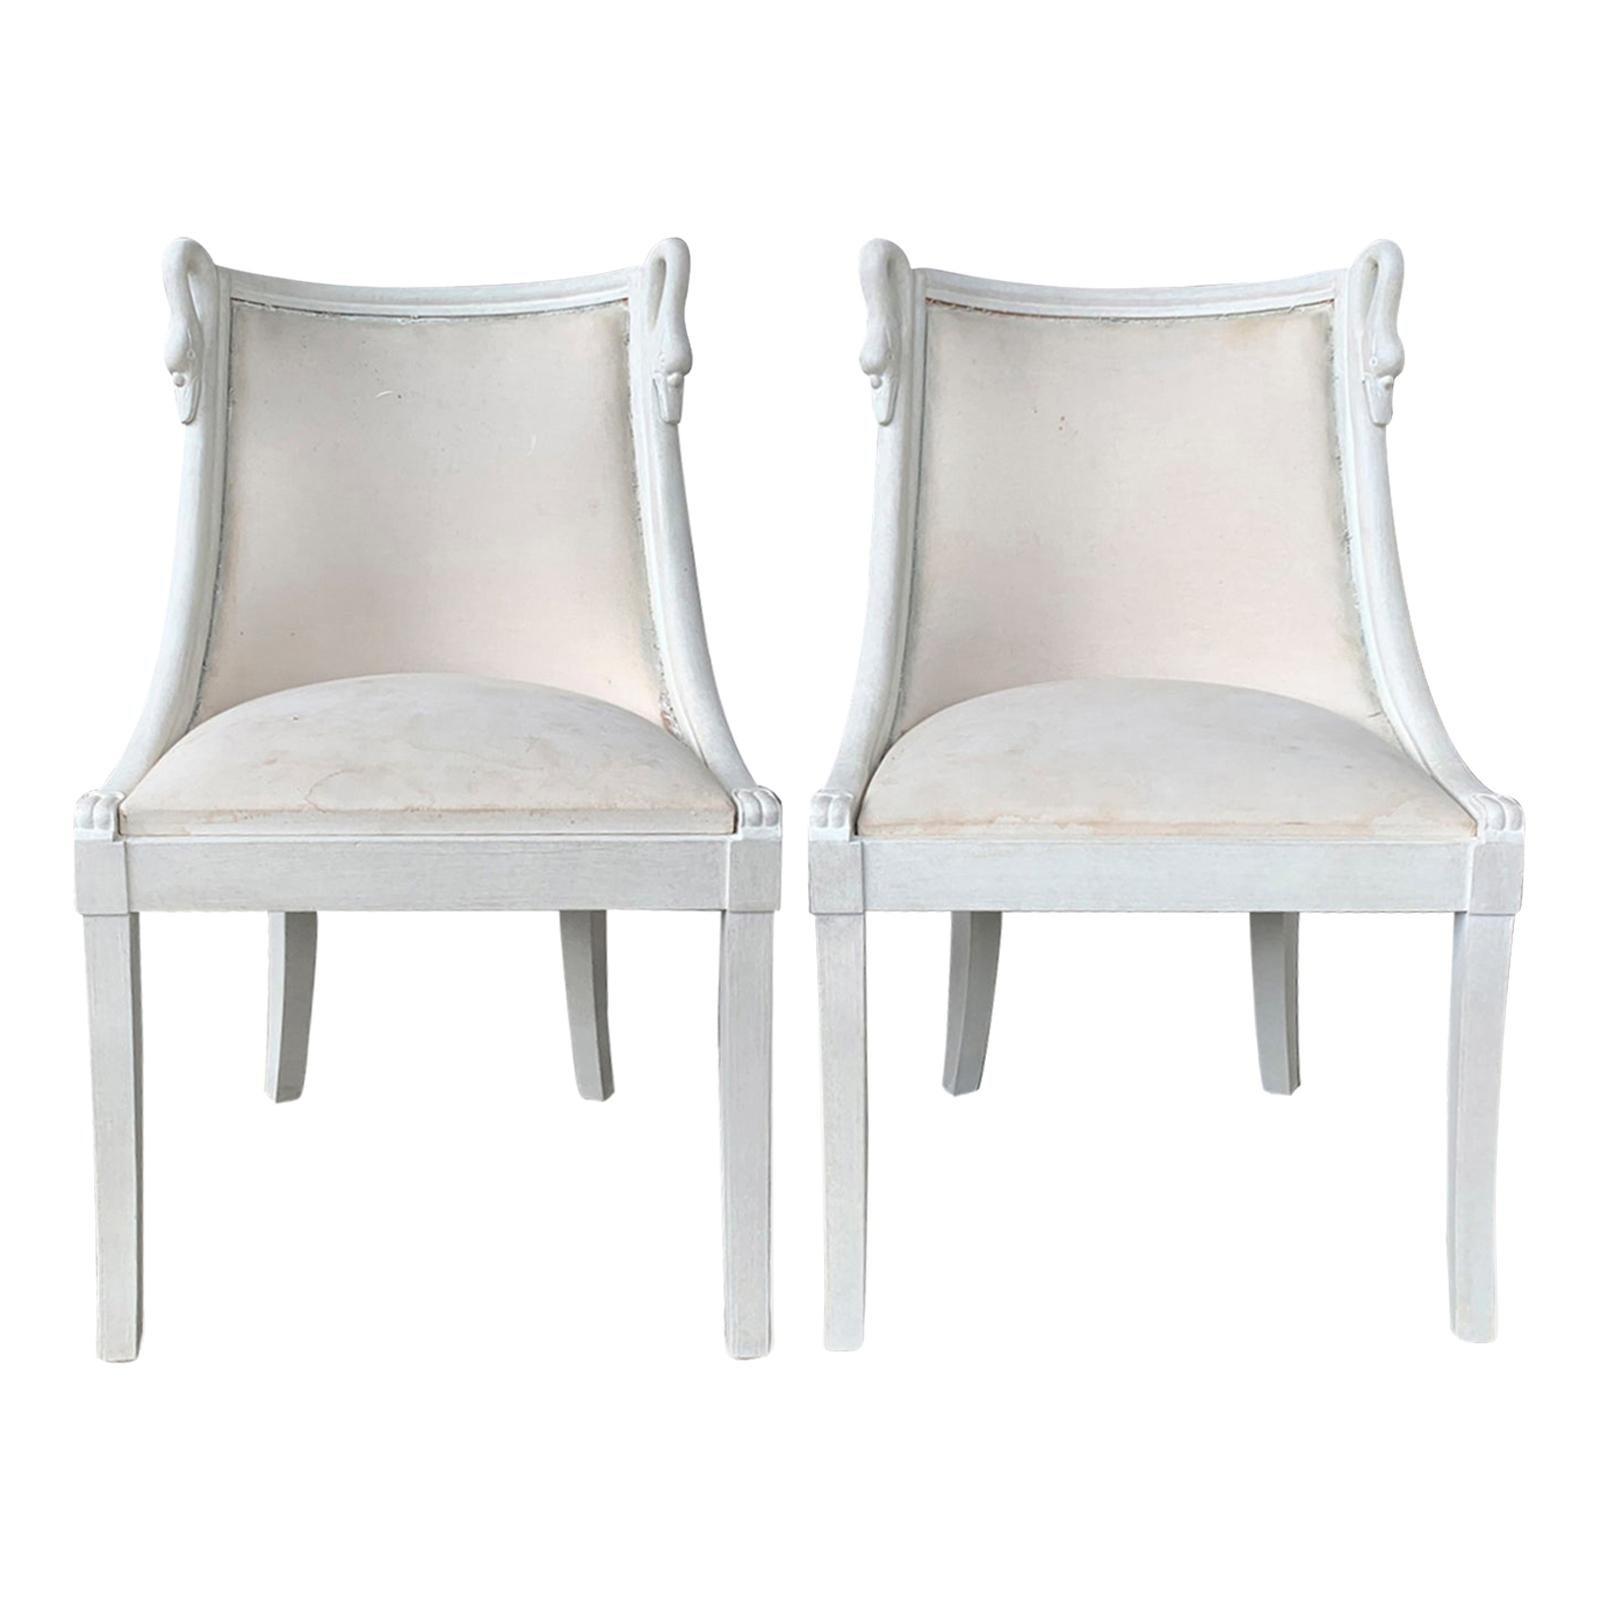 Pair of 20th Century Italian Neoclassical Gondola Painted Chairs with Swan Motif